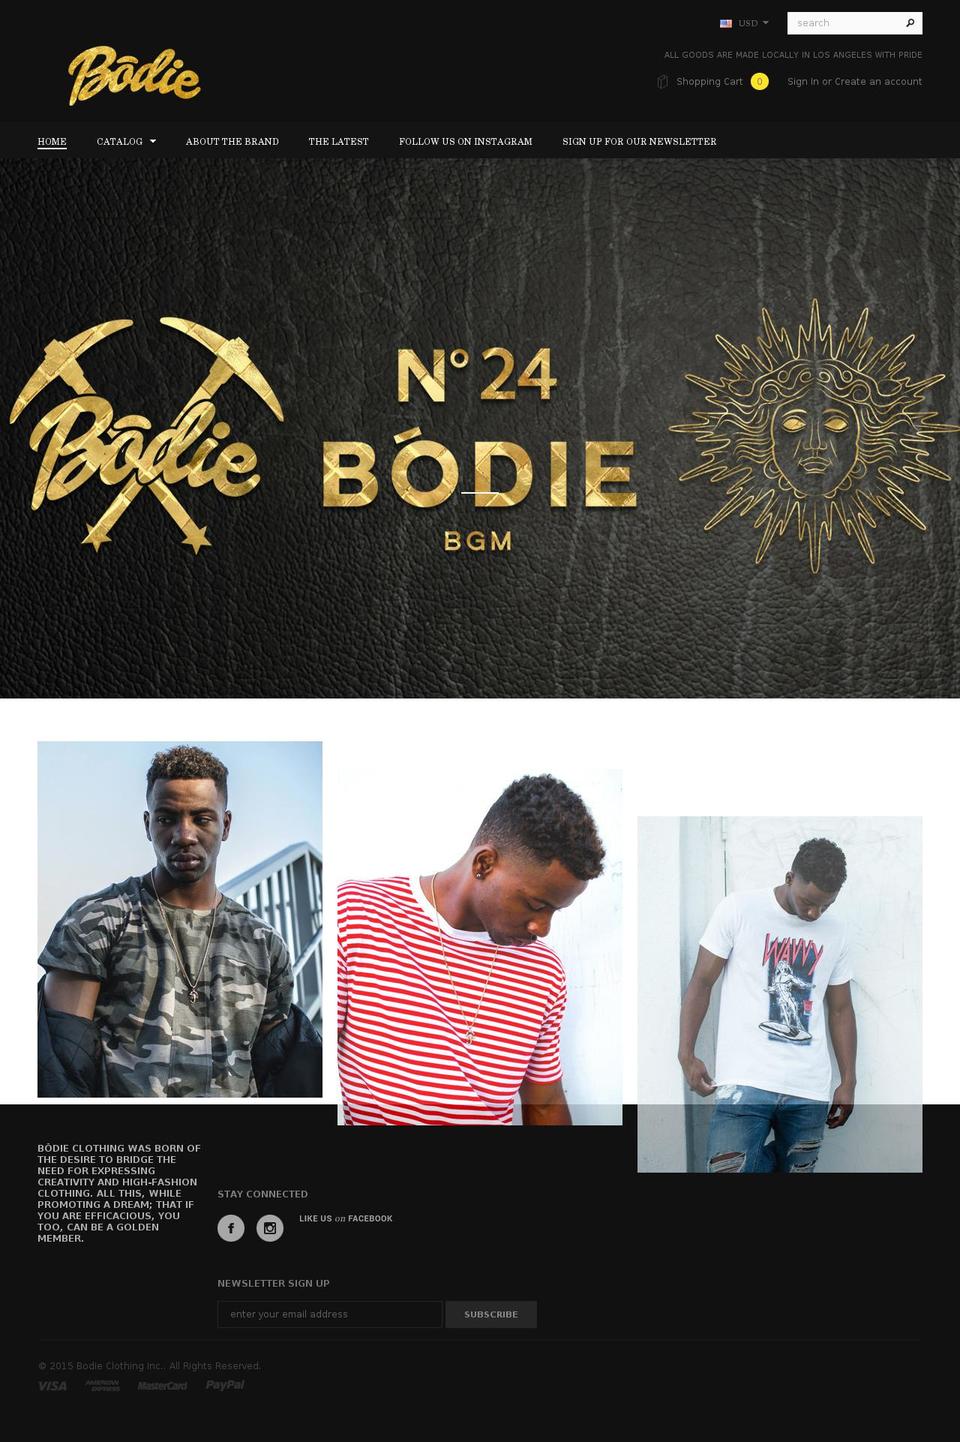 Taste Shopify theme site example bodieclothing.com